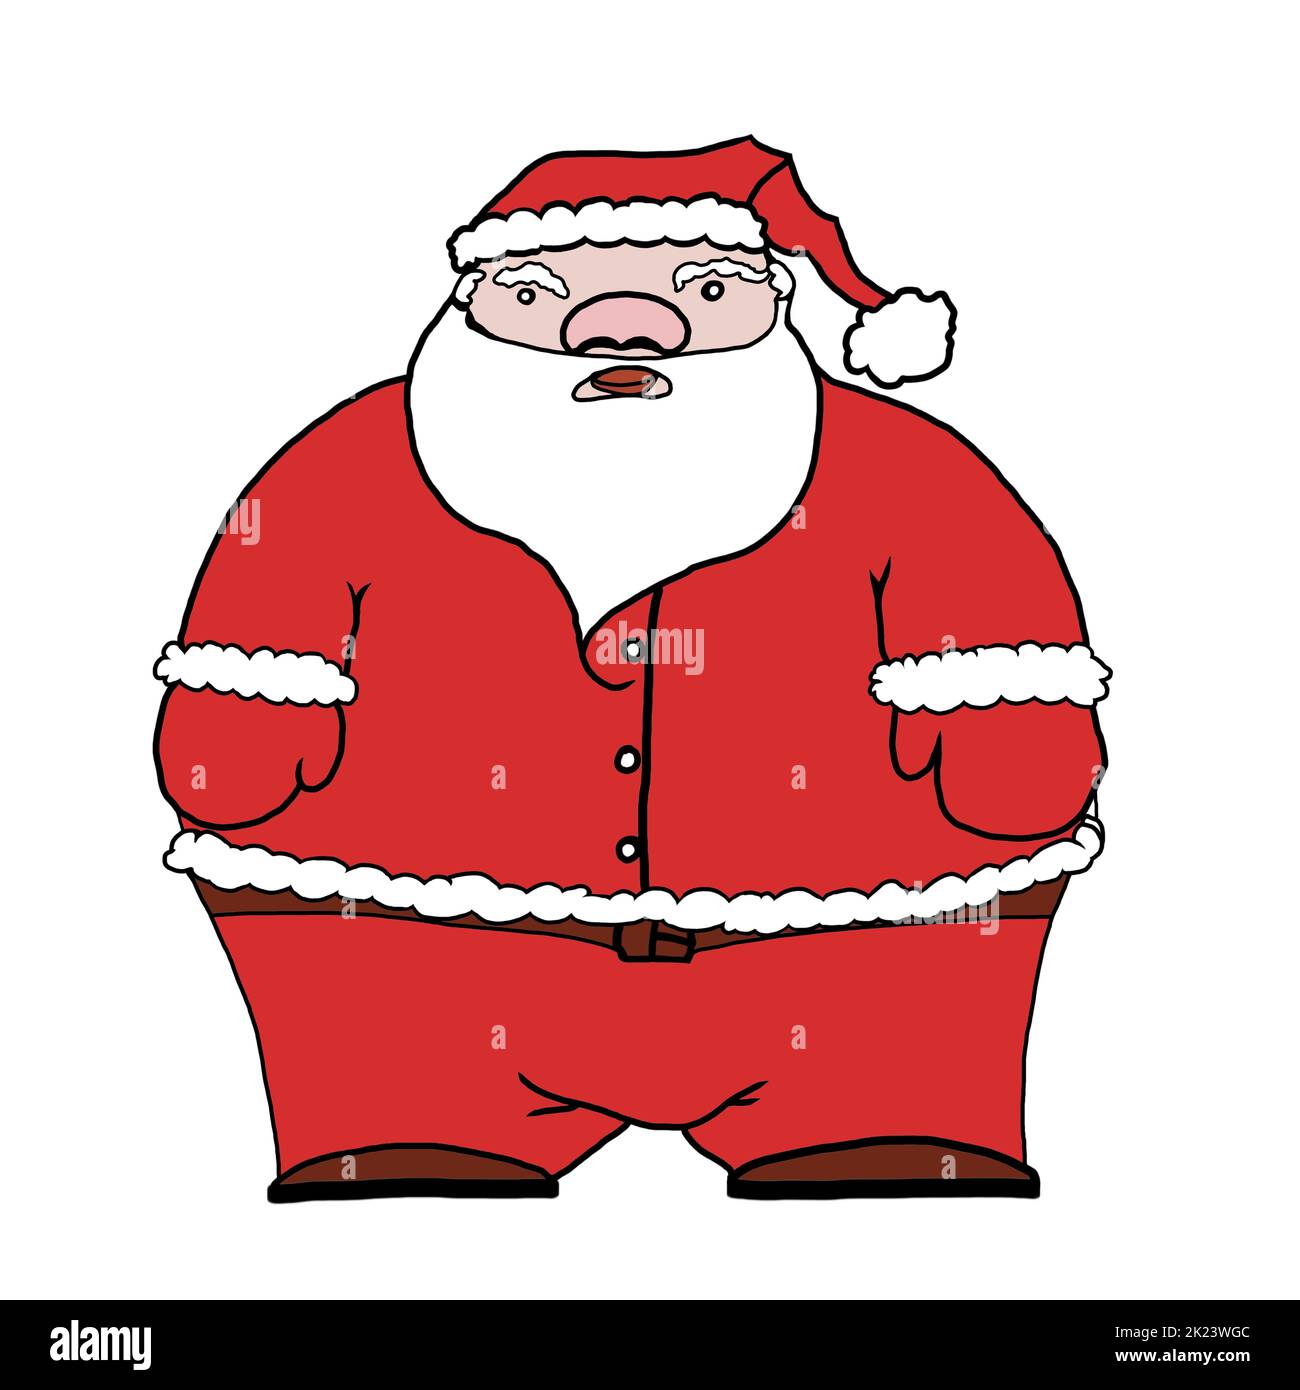 Fat Santa came for Christmas. Sticker for the new year. Stock Photo